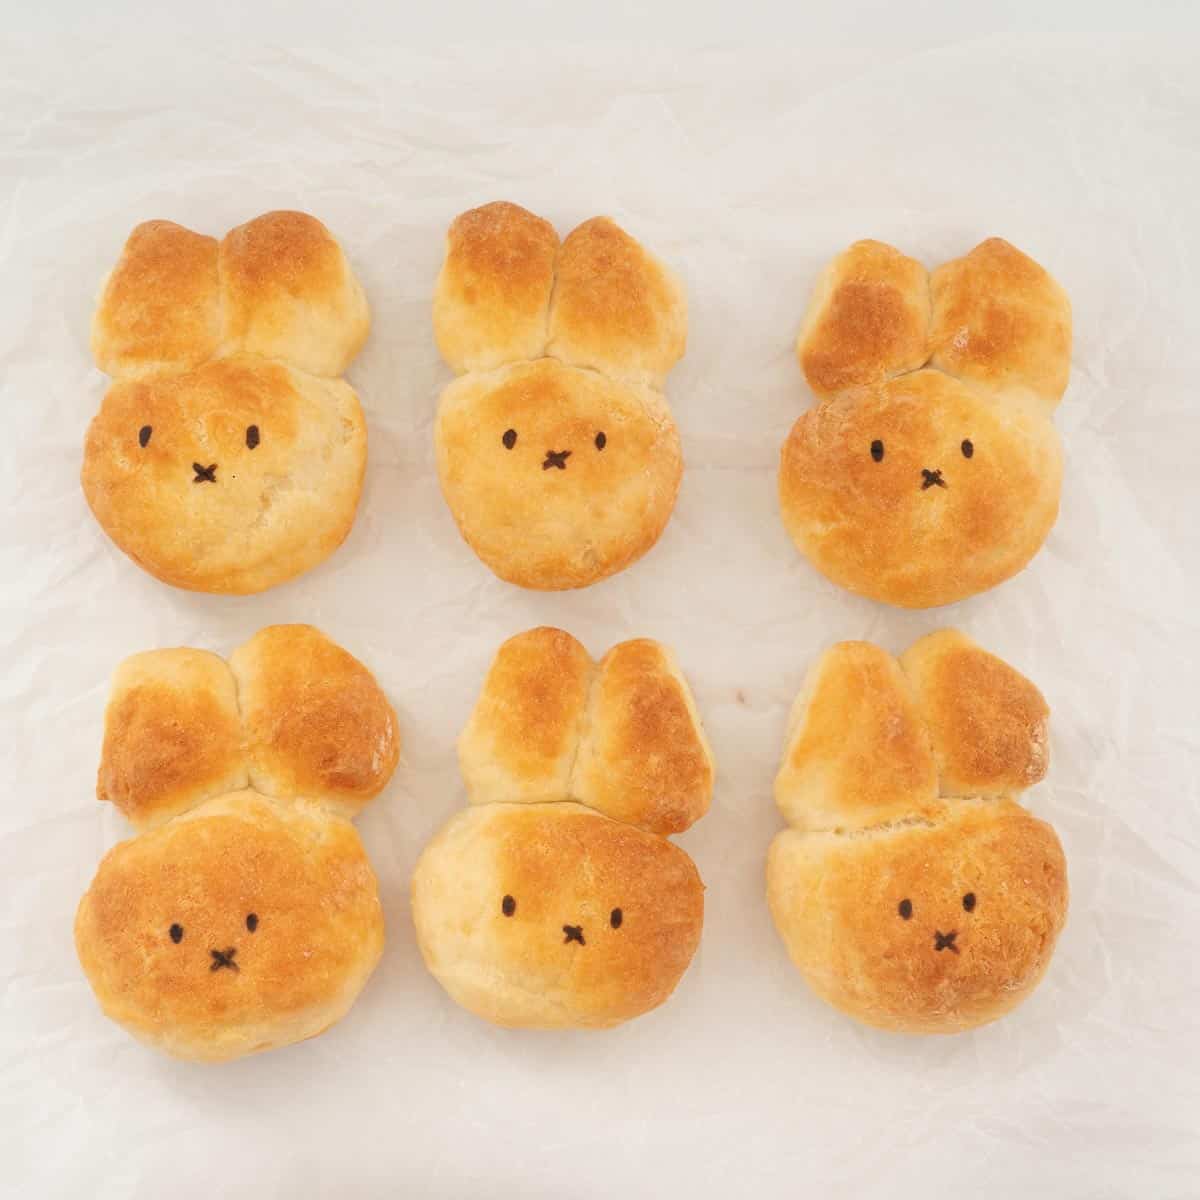 6 bunny buns on crinkled white parchment paper. 